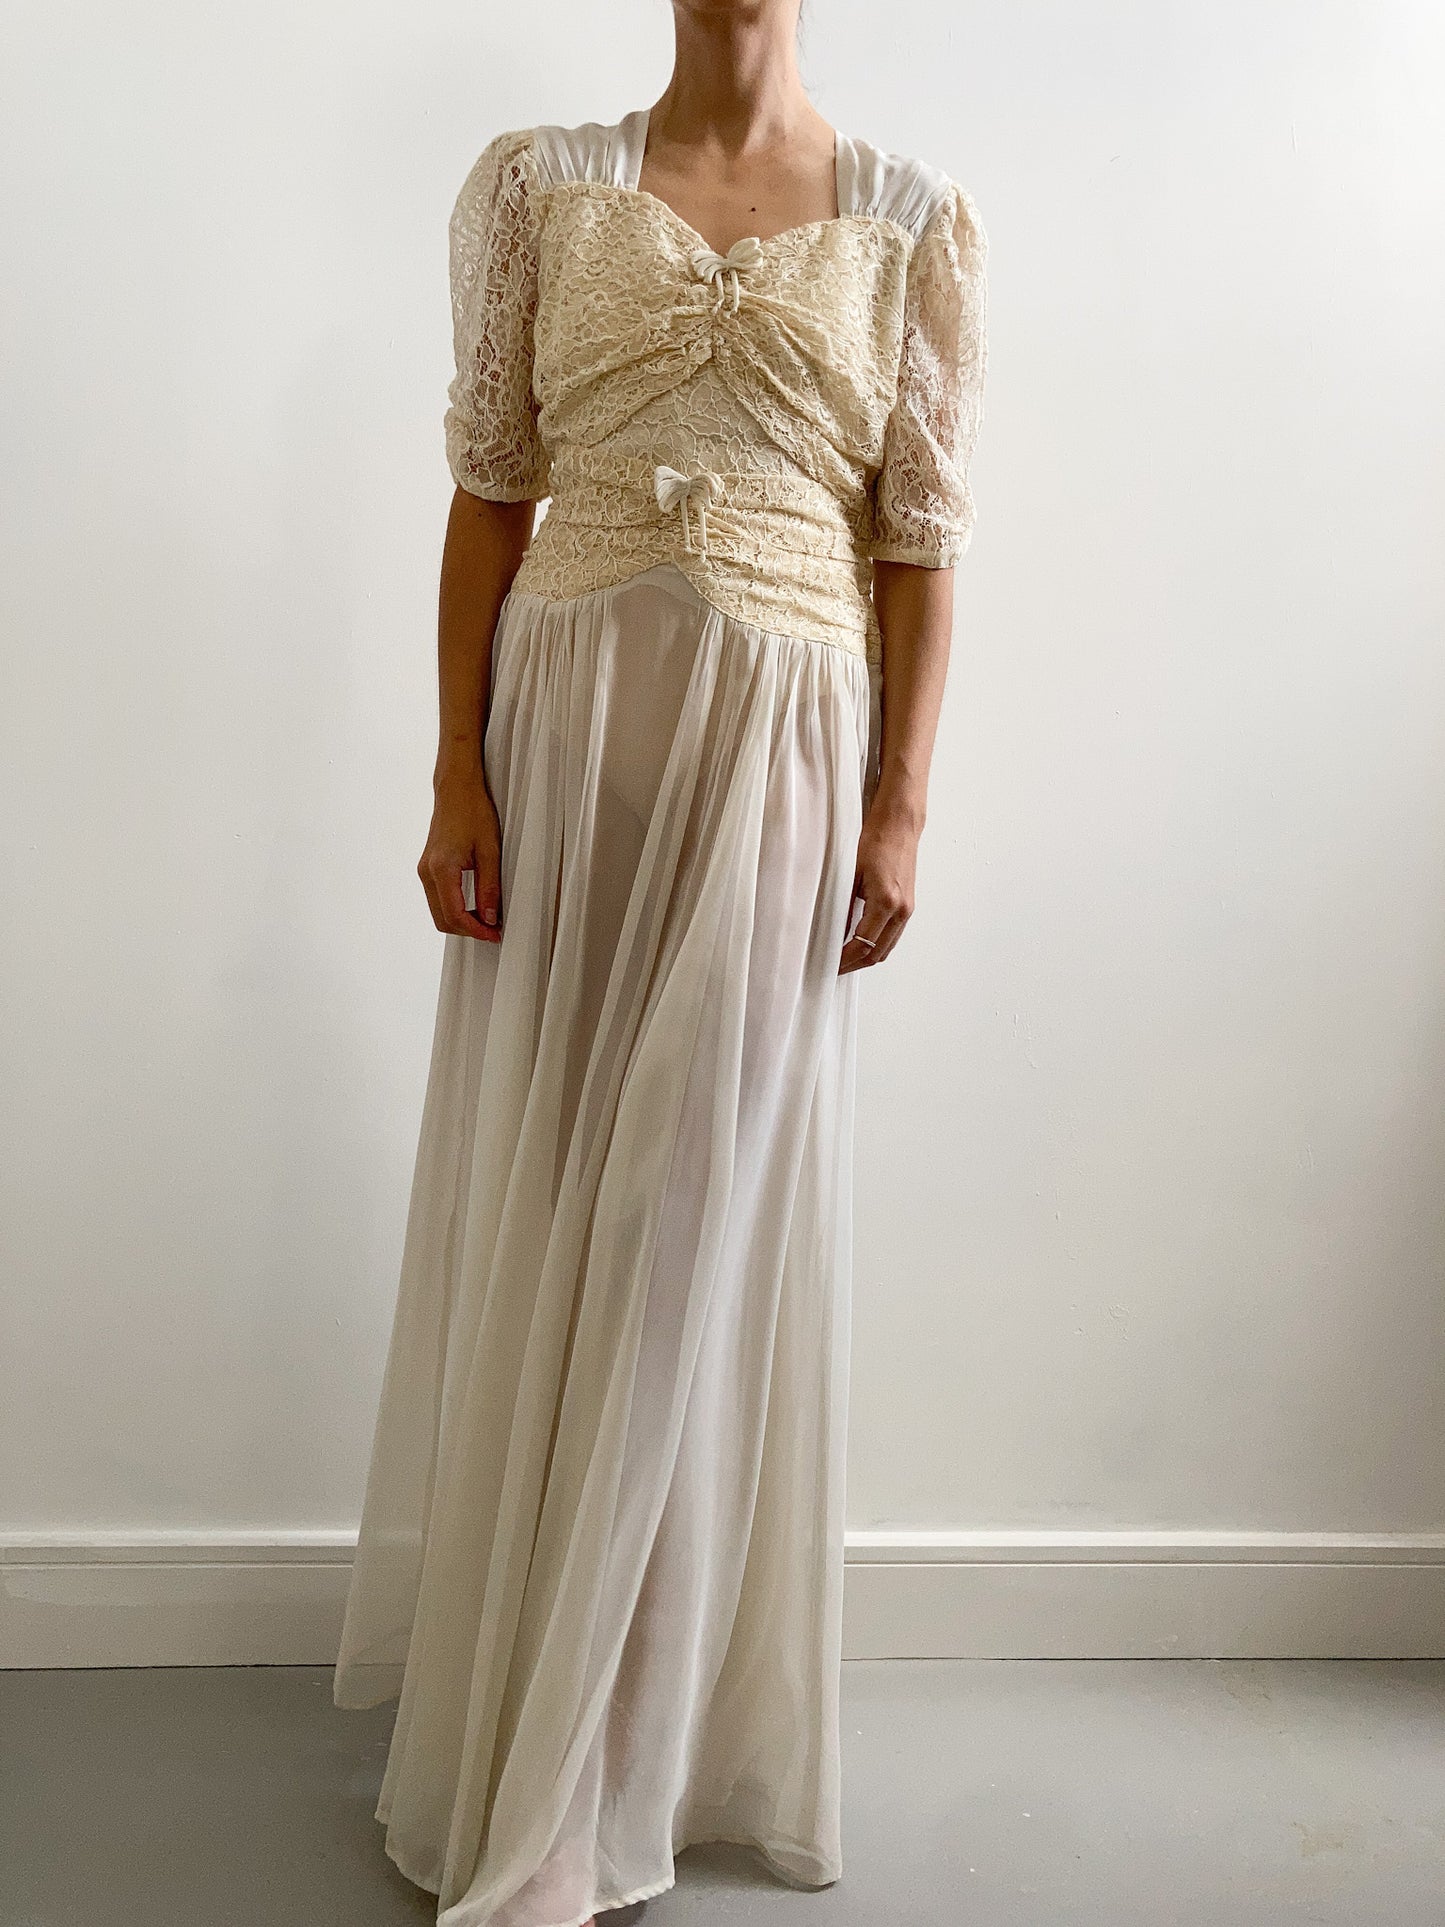 1940s Champagne Lace and Chiffon Wedding Dress with Bows